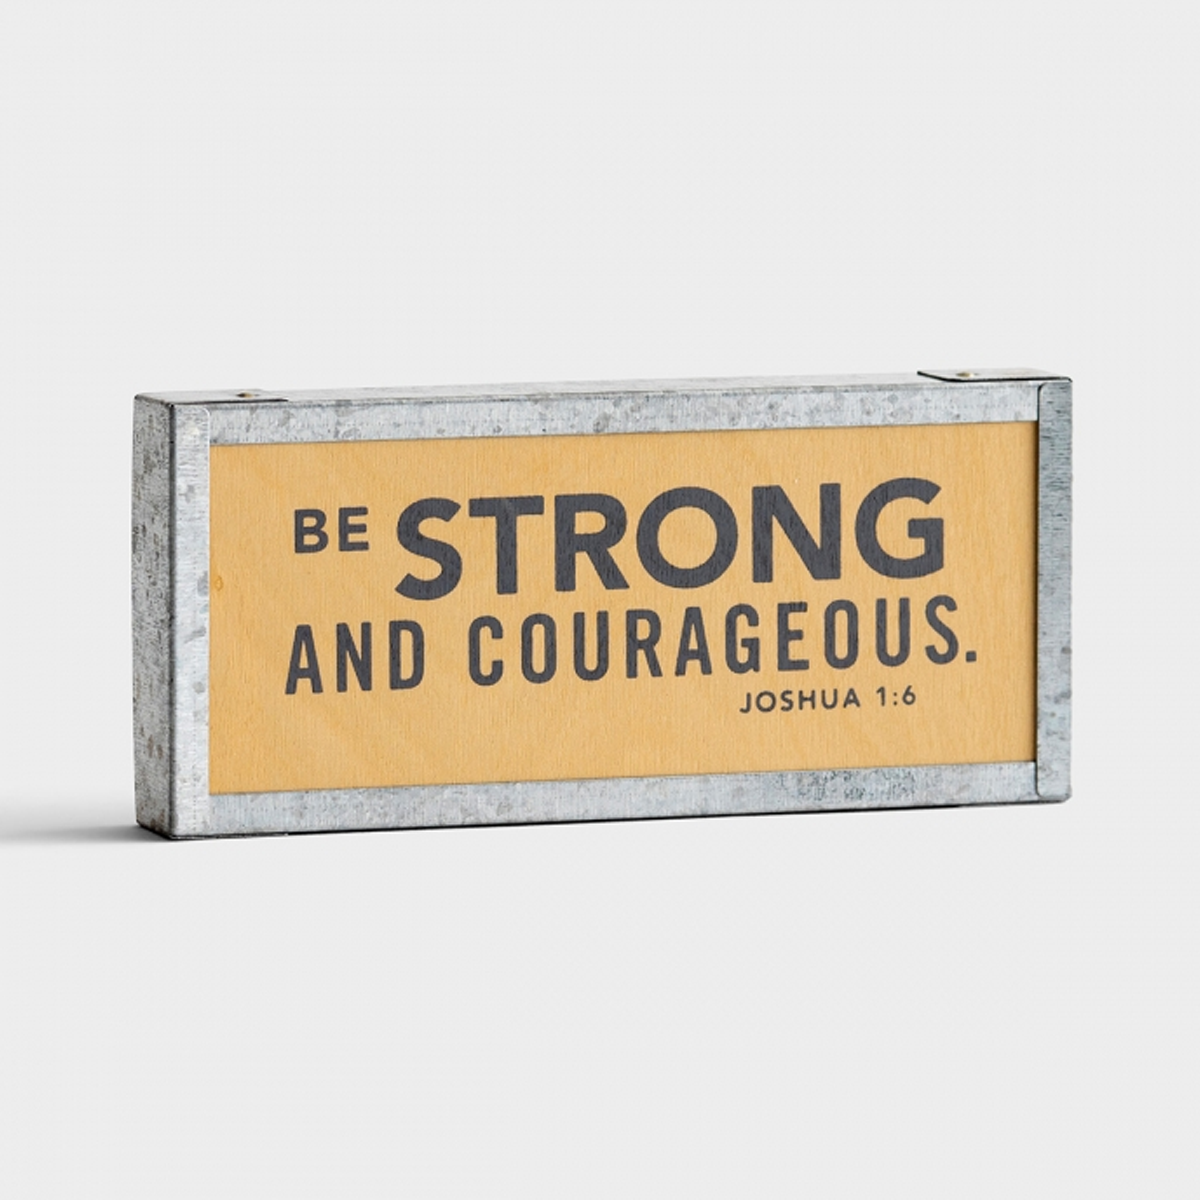 Be Strong and Courageous - Mini Tabletop Plaque - Southern Grace Creations